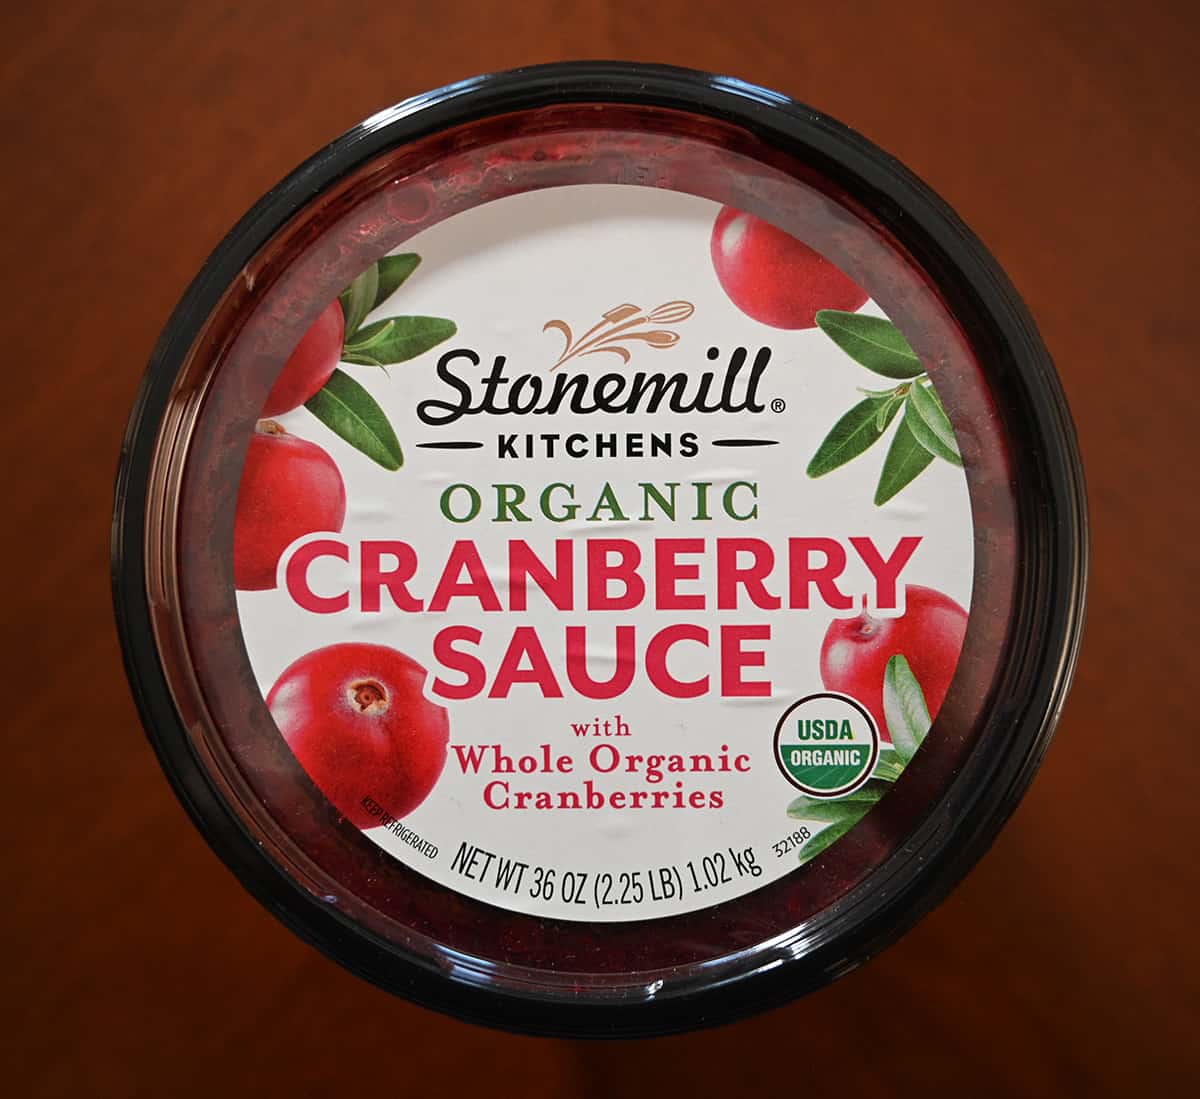 Top down image of the Costco Stonemill Kitchen Organic Cranberry Sauce container top showing that it's organic and weighs 1.02 kiligrams. 